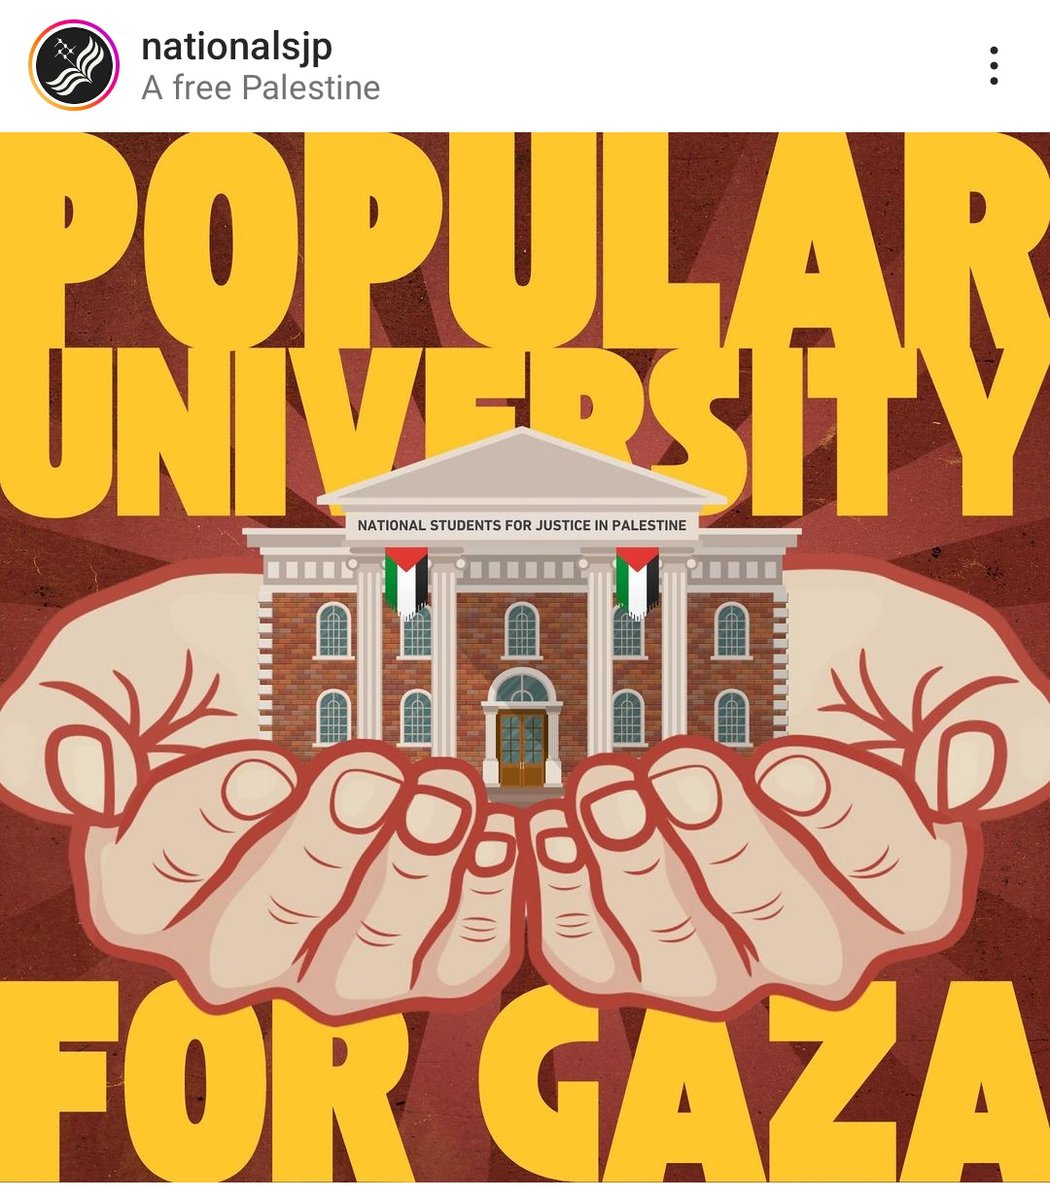 🚨BREAKING: Columbia University's 'Gaza Solidarity Encampment' is going nationwide🚨 The National Students for Justice in Palestine announces the Popular University for Gaza. NSJP's statement reads: 'WE ARE ALL SJP! 🇵🇸 Our universities have chosen profit and reputation over